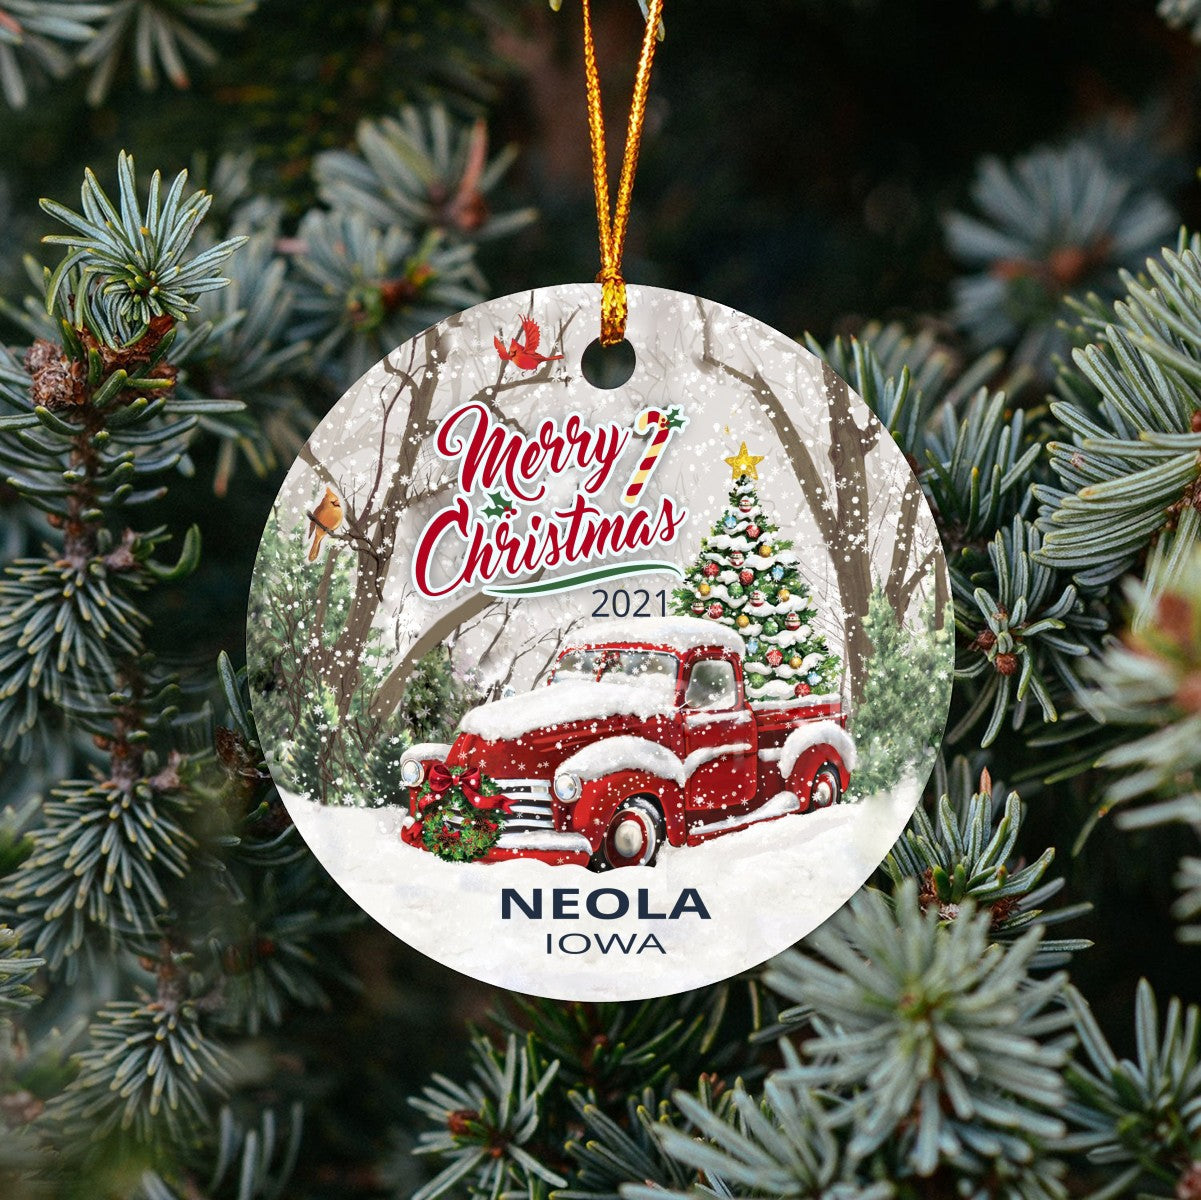 Christmas Tree Ornaments Neola - Ornament With Name City, State Neola Iowa IA Ornament - Red Truck Xmas Ornaments 3'' Plastic Gift For Family, Friend And Housewarming